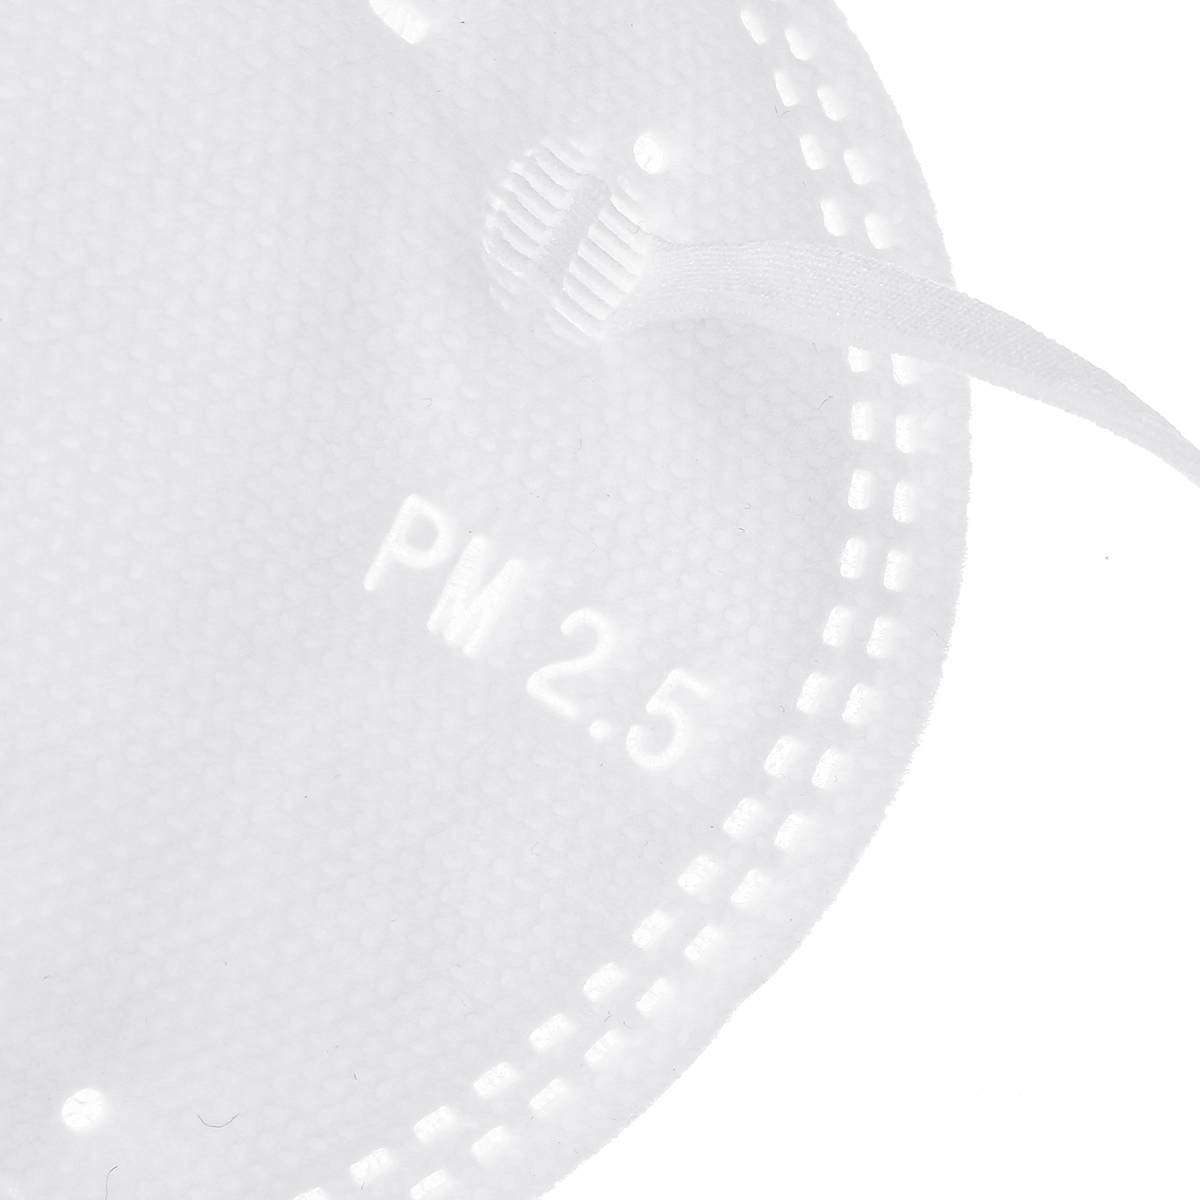 2Pcs-PM25-High-Quality-Mouth-Cover-Filter-Mask-Dustproof-Particulate-Respirator-1643214-4